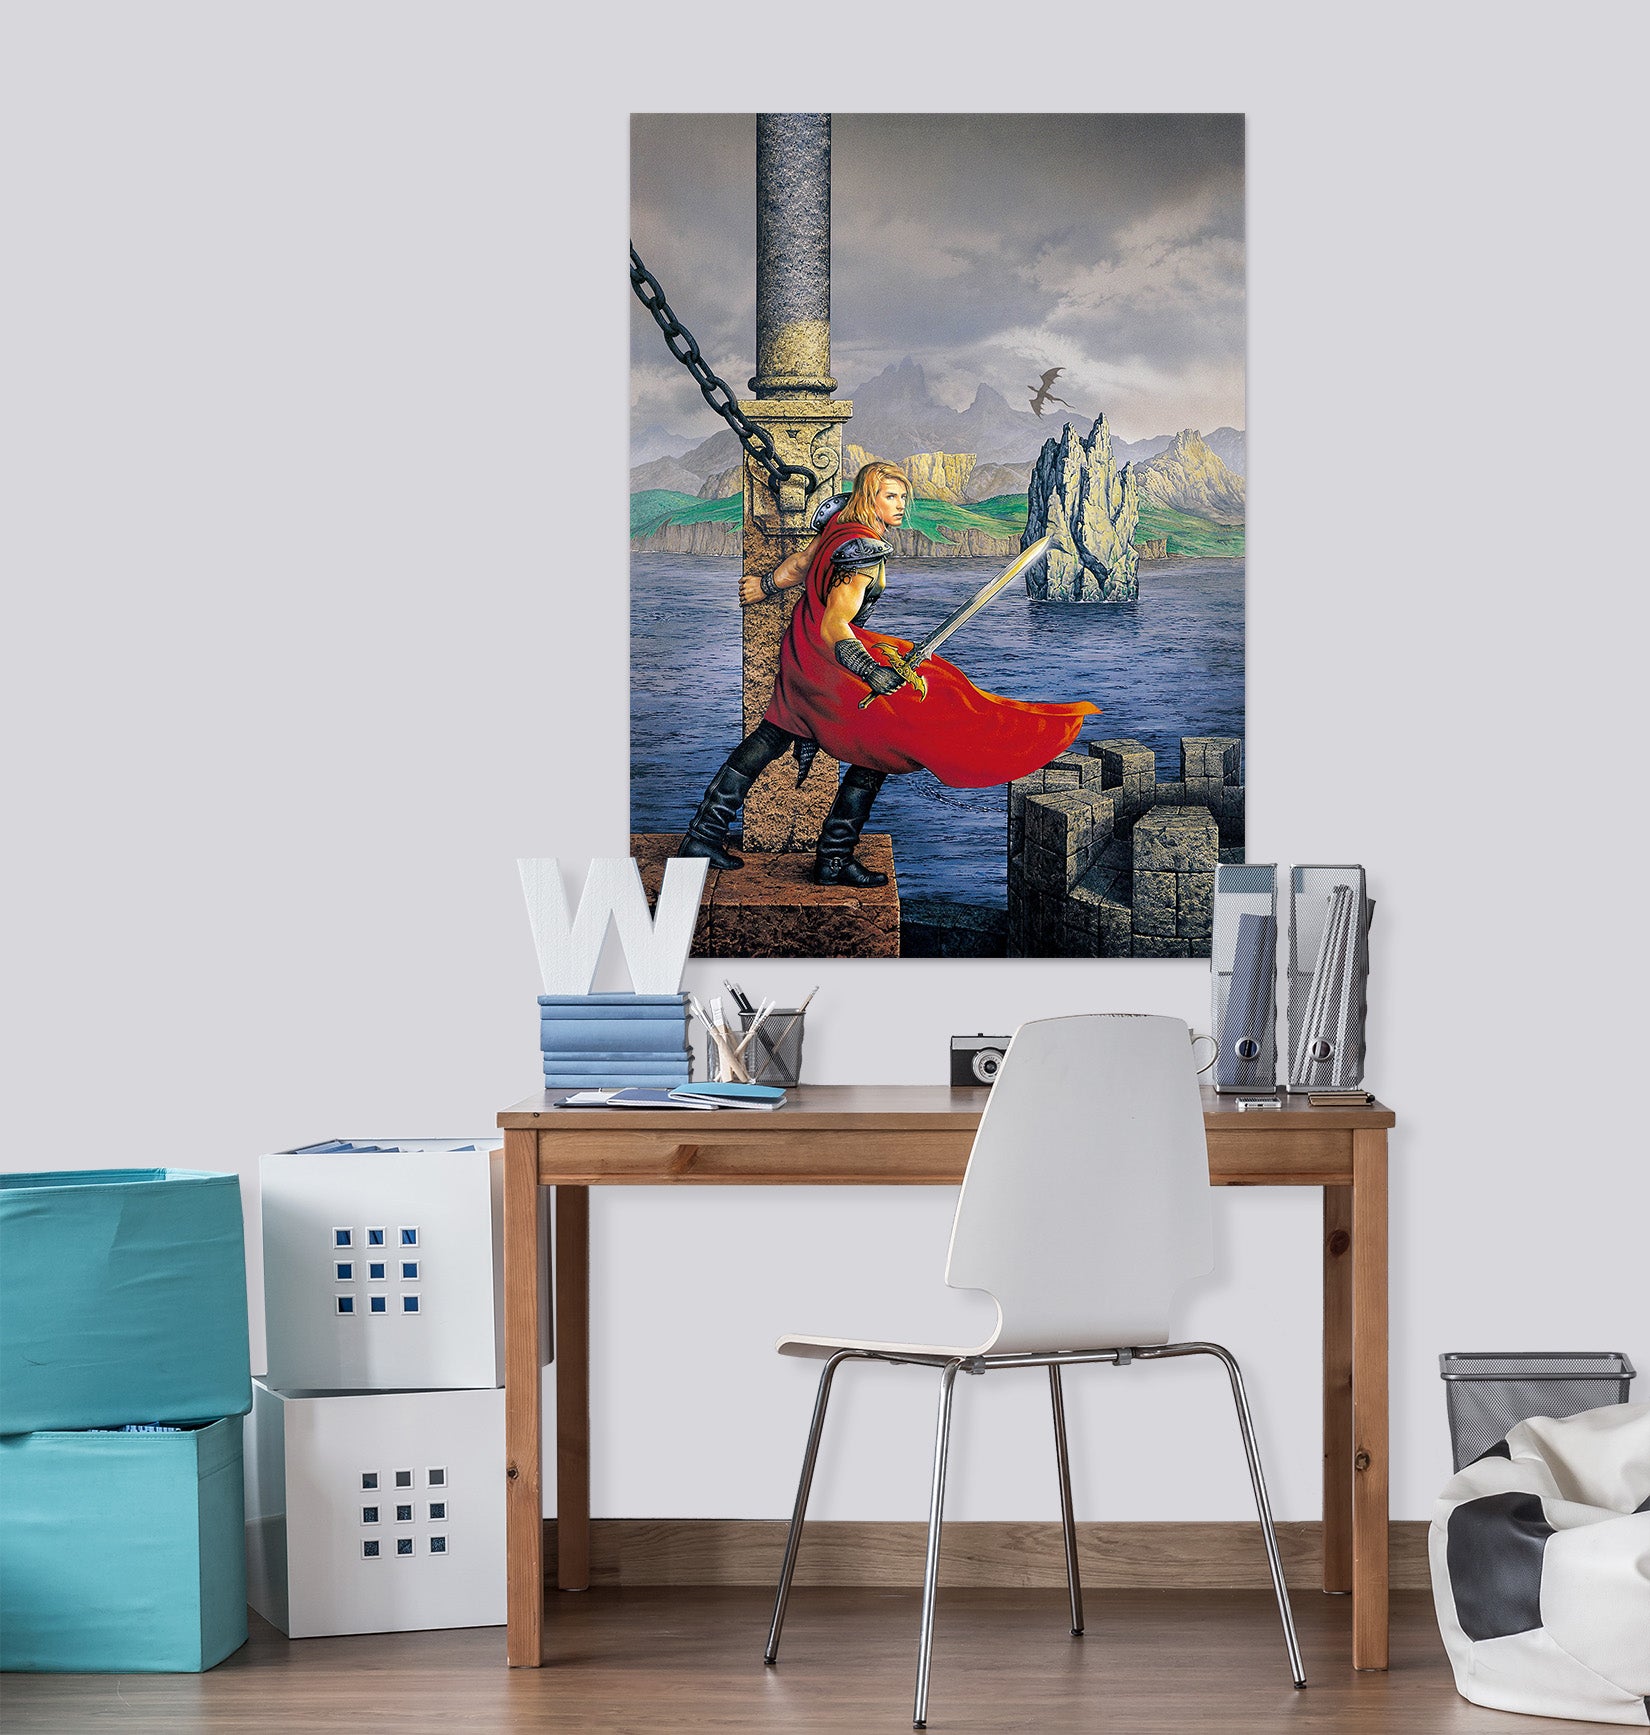 3D Soldier With Sword 8091 Ciruelo Wall Sticker